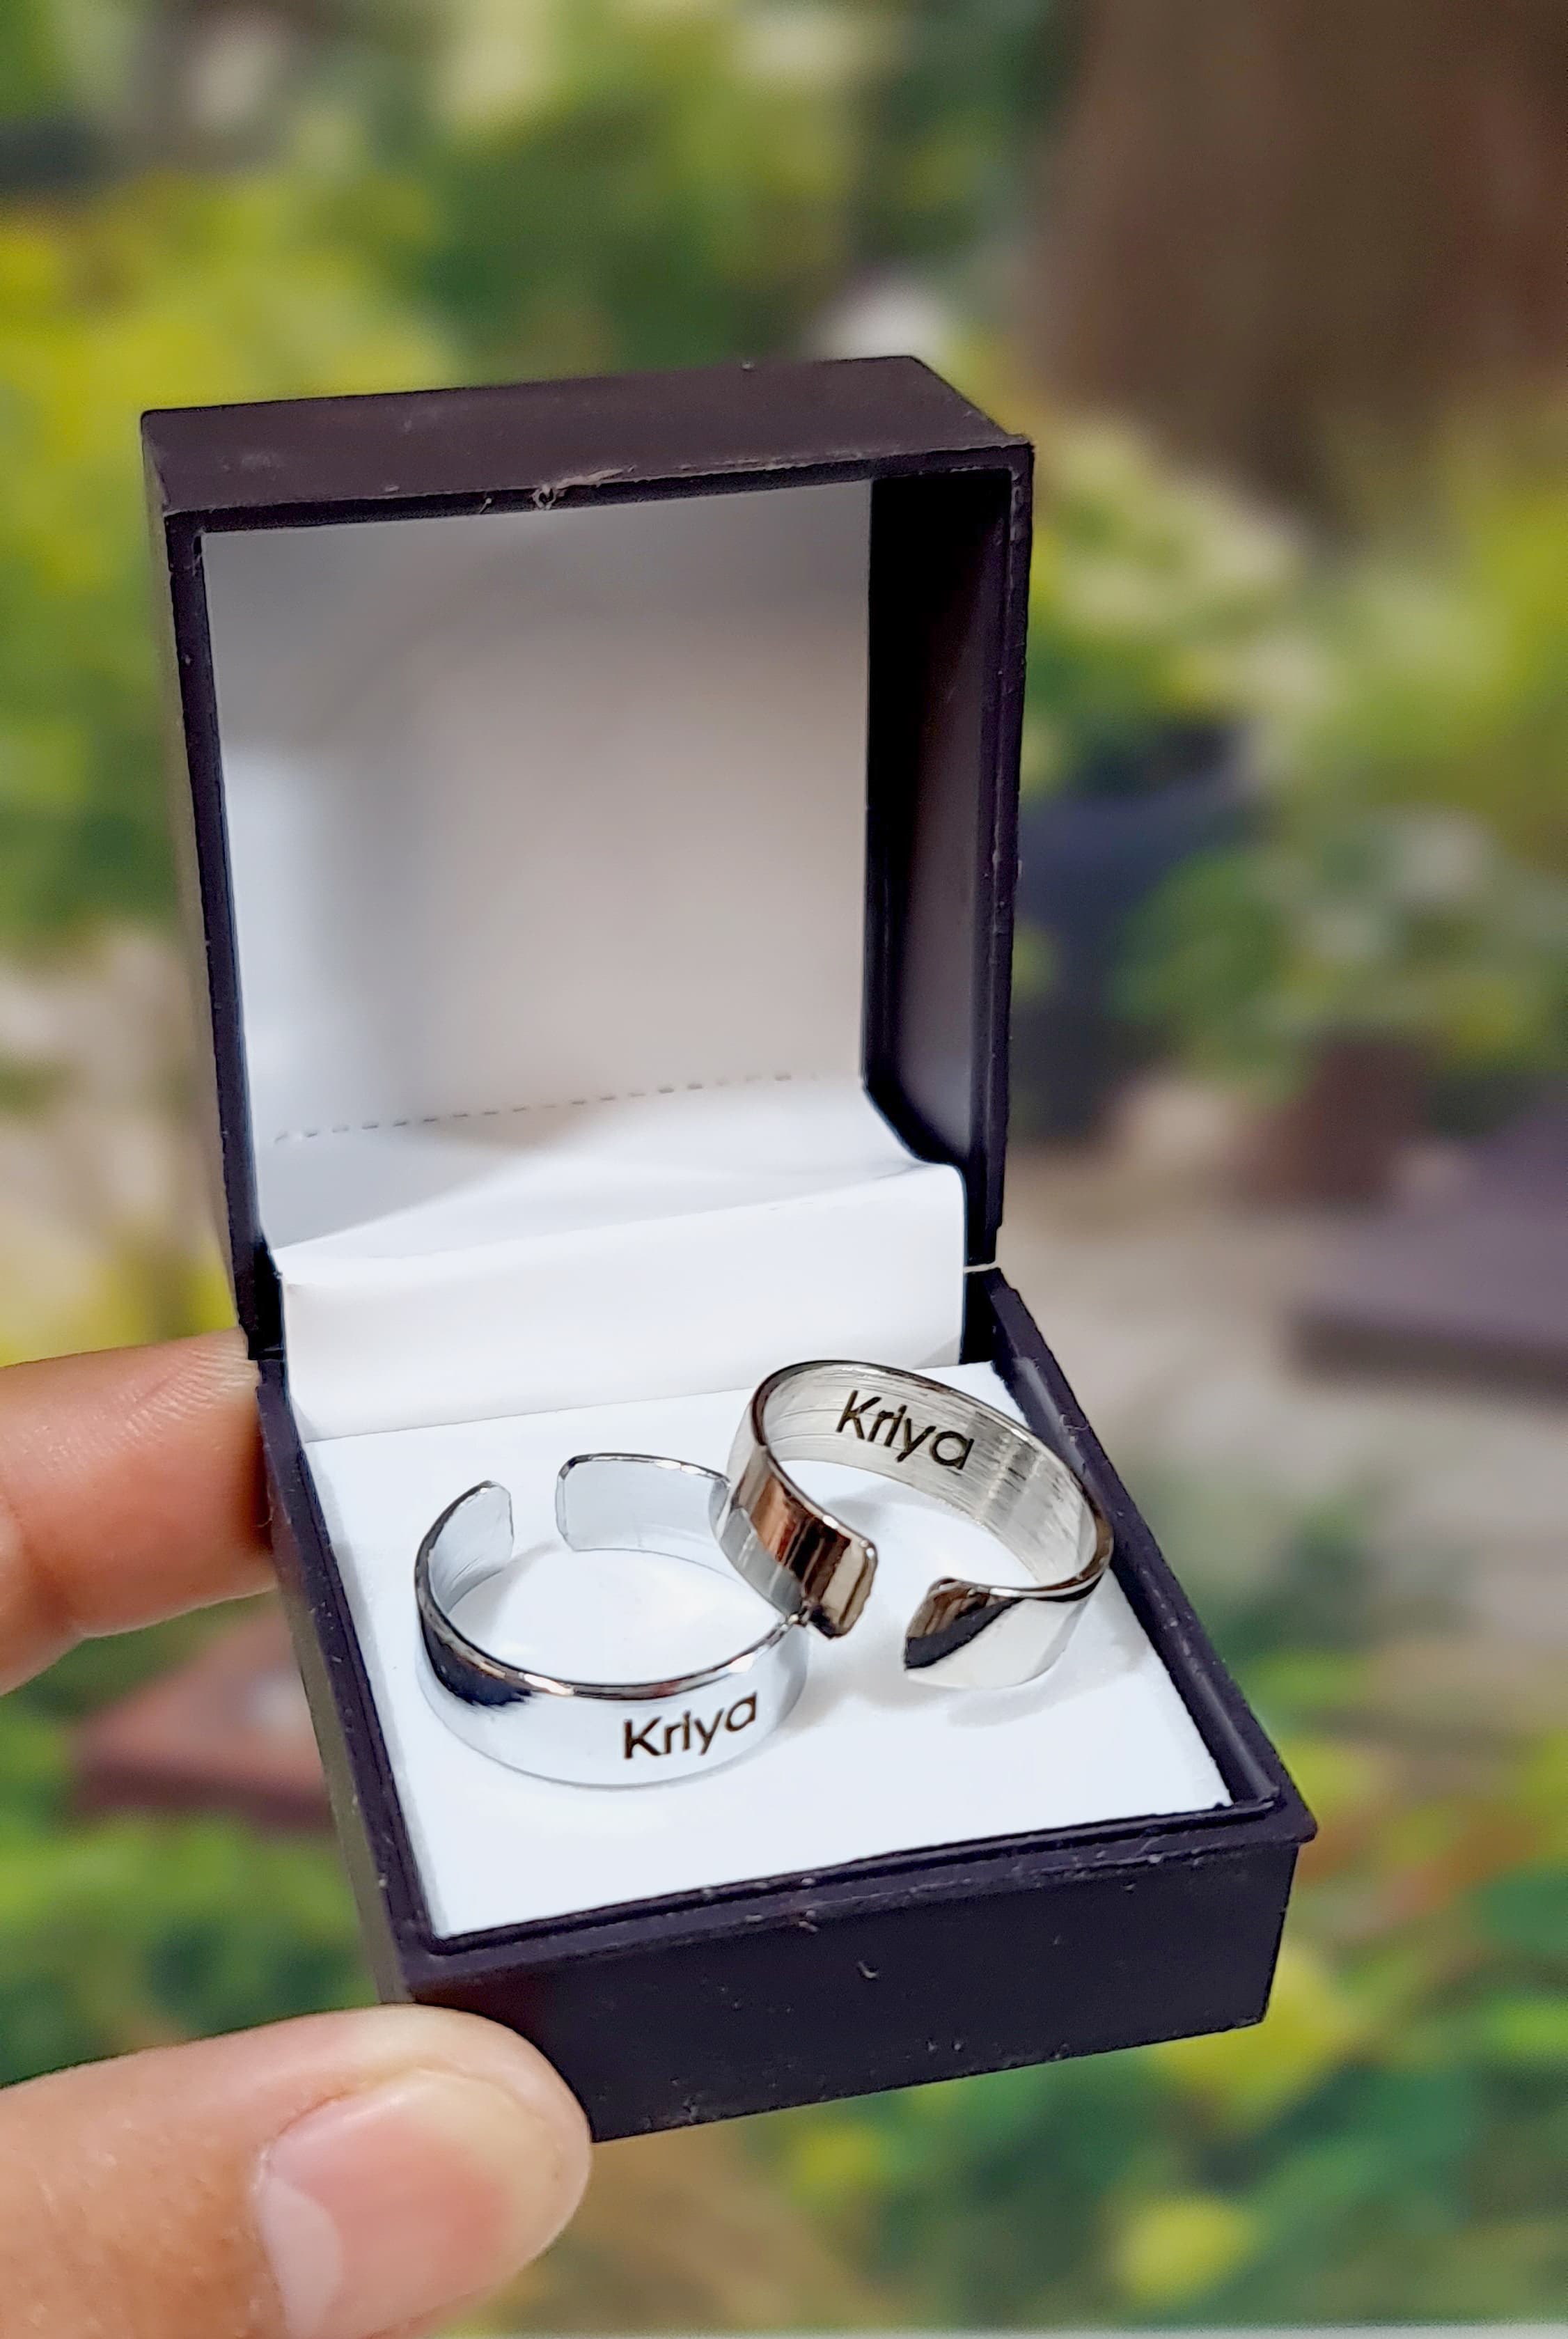 Personalized Gold Wedding Rings for Couples